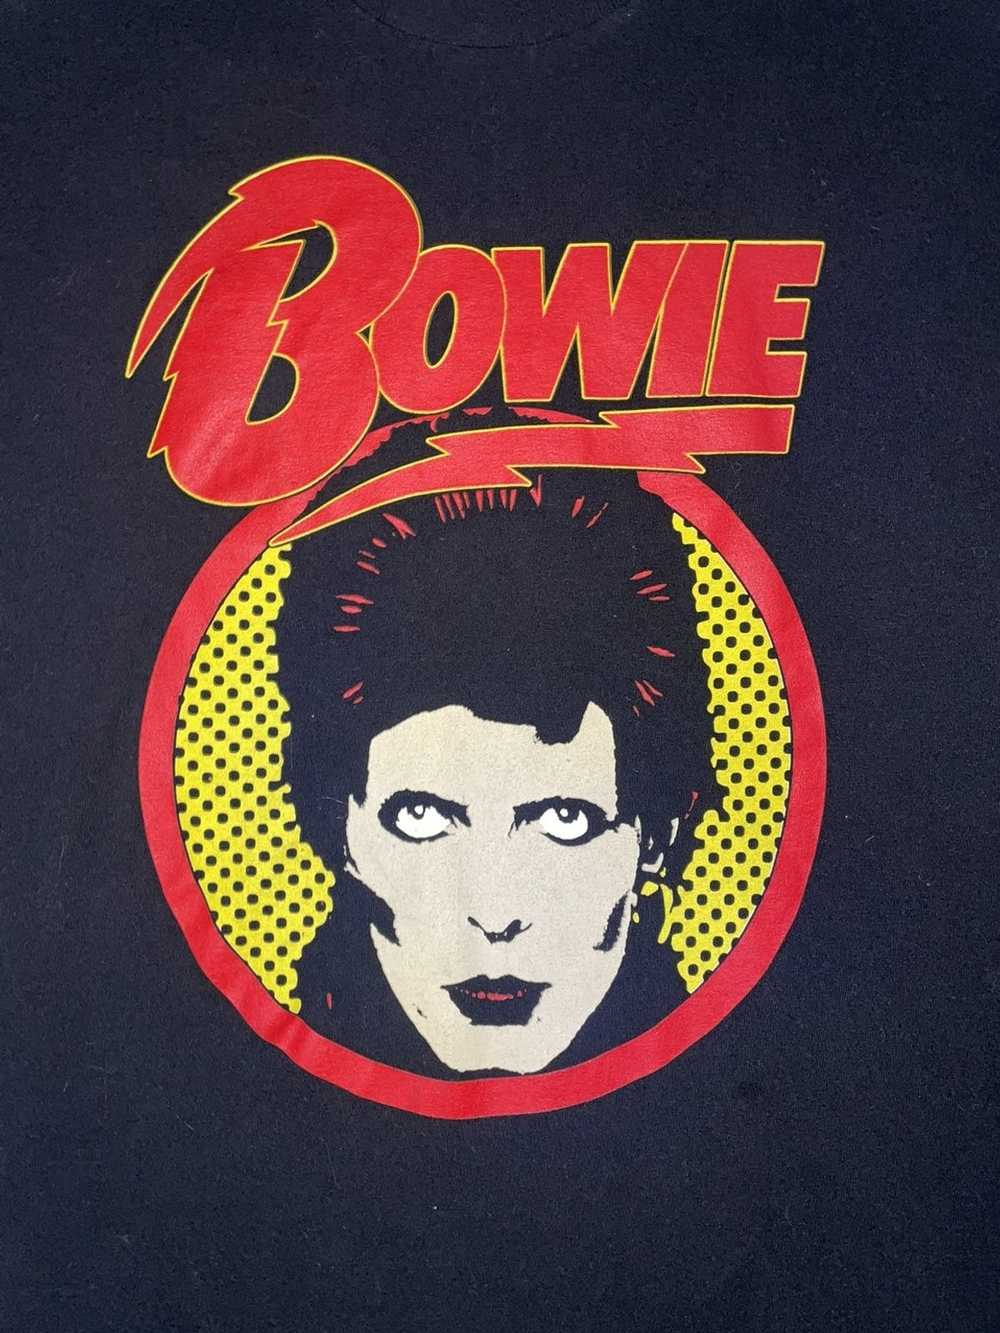 Vintage Early 2000s David Bowie tee - image 3